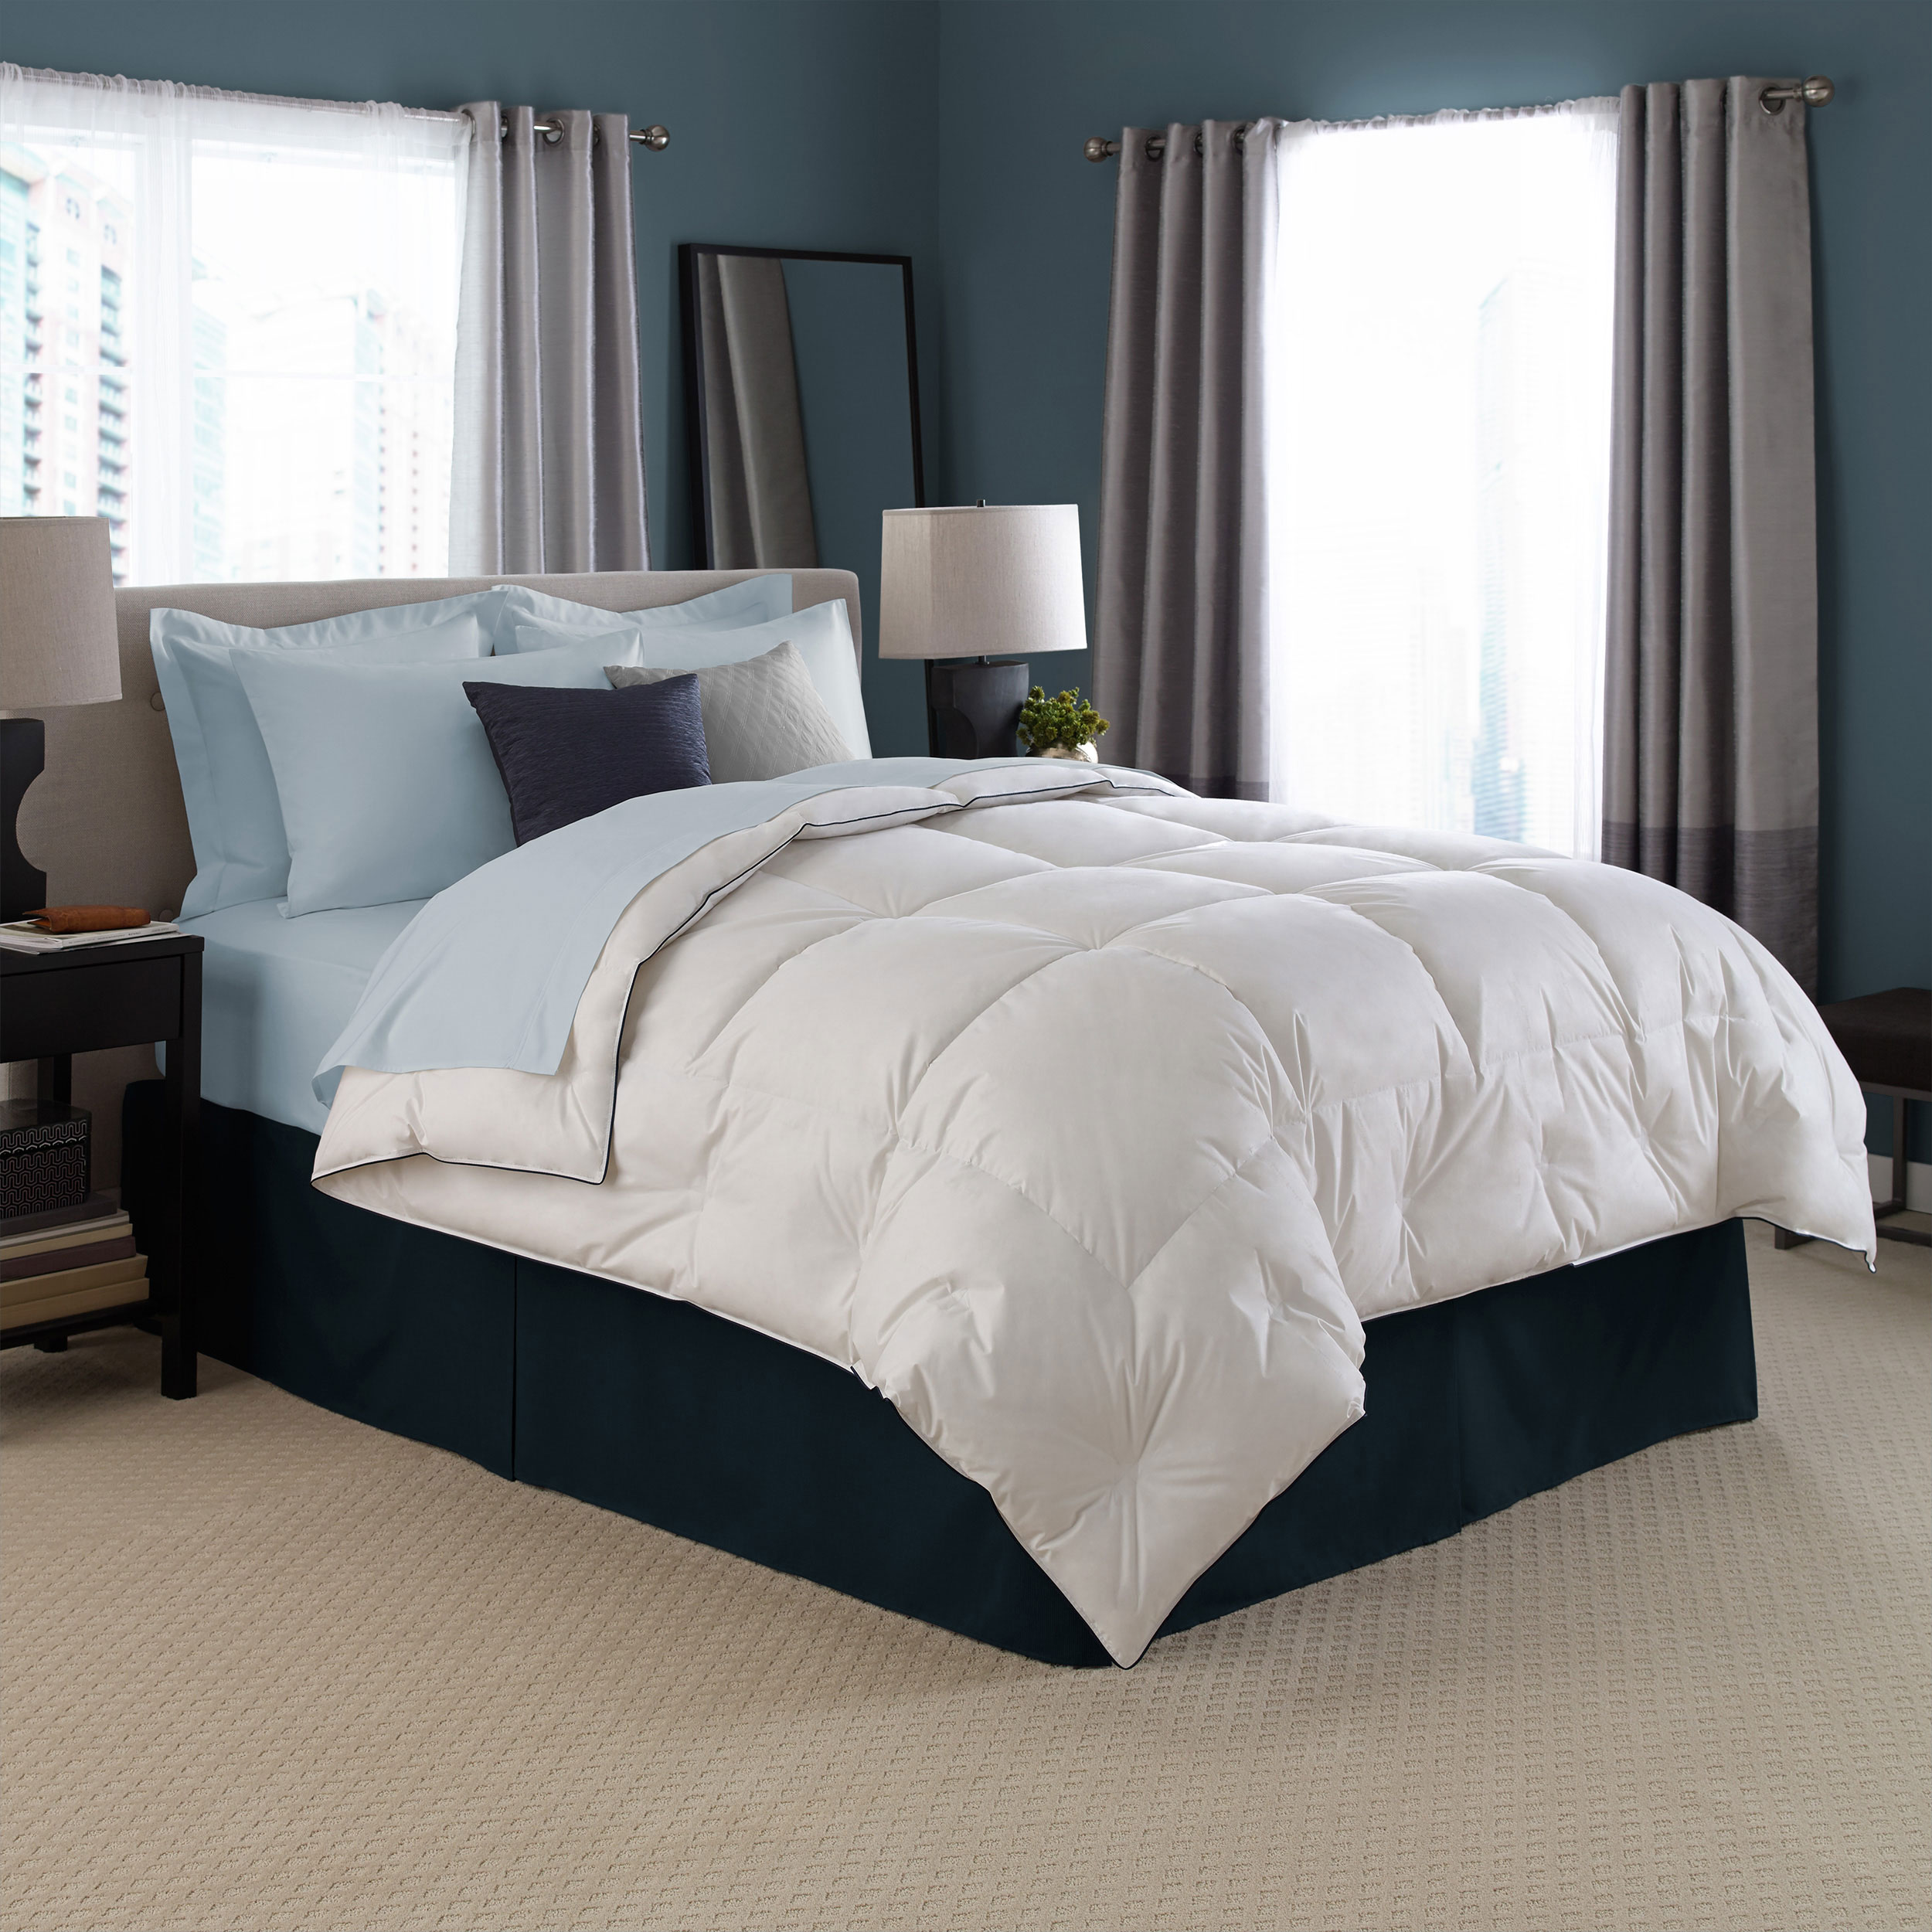 Pacific Coast Bedding Products - Pacific Coast Bedding